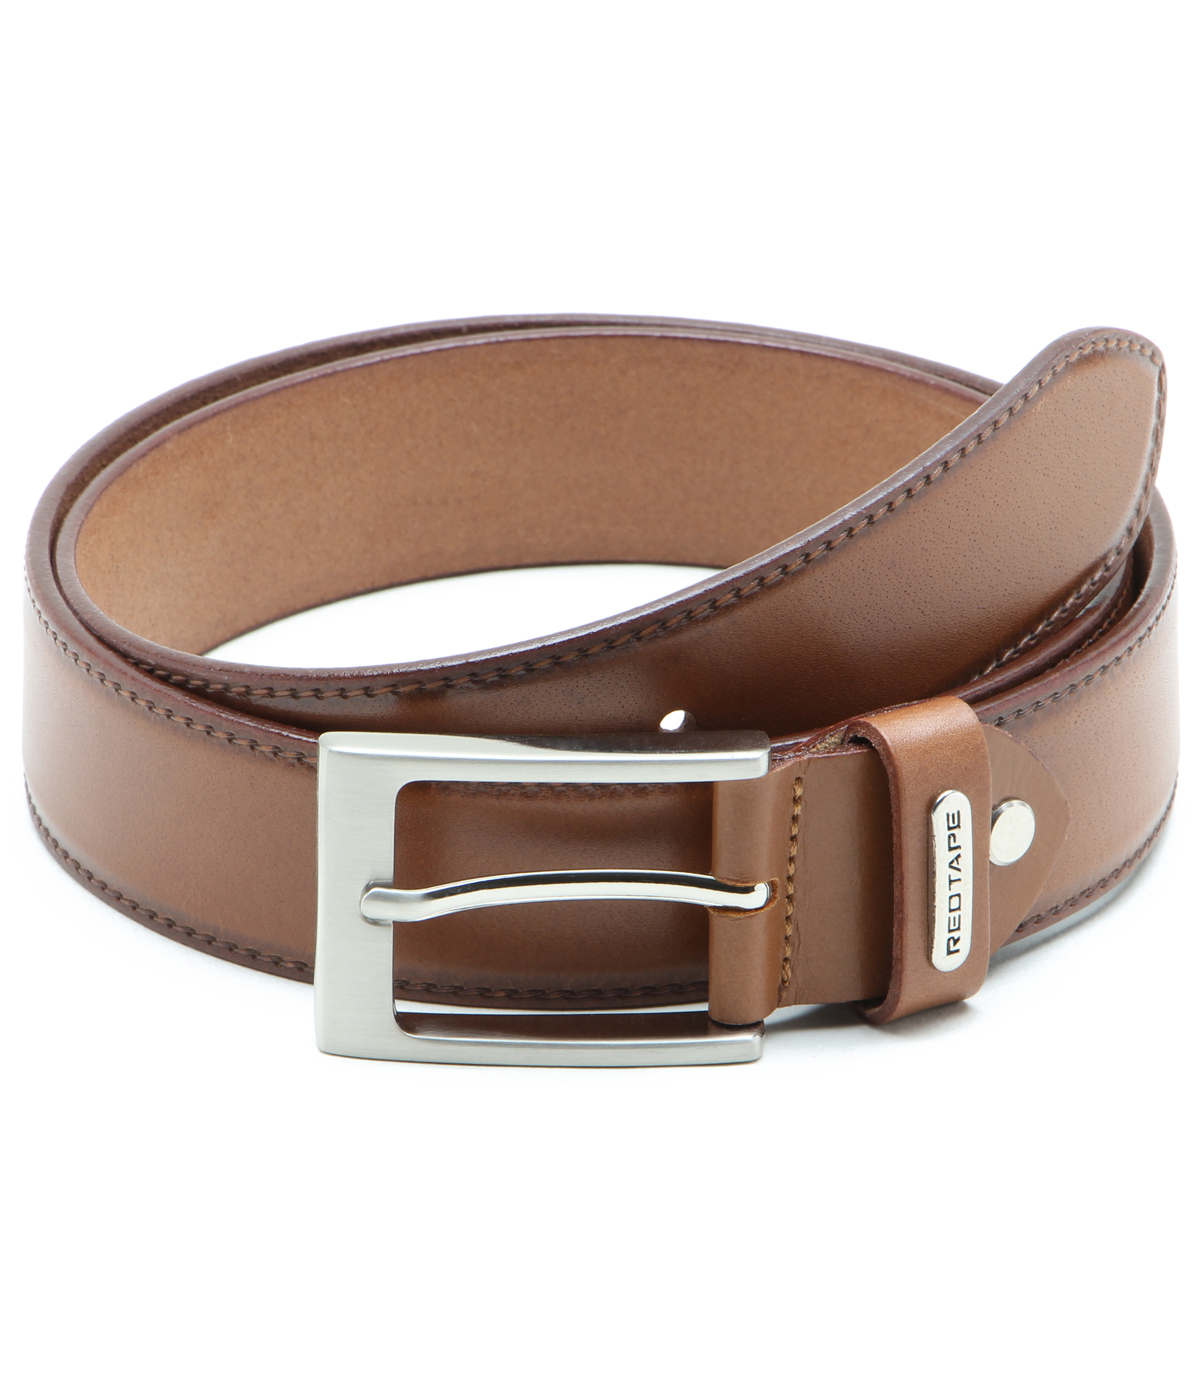 Buy Red Tape Tan Leather Belt RBL181 Online @ ₹1195 from ShopClues